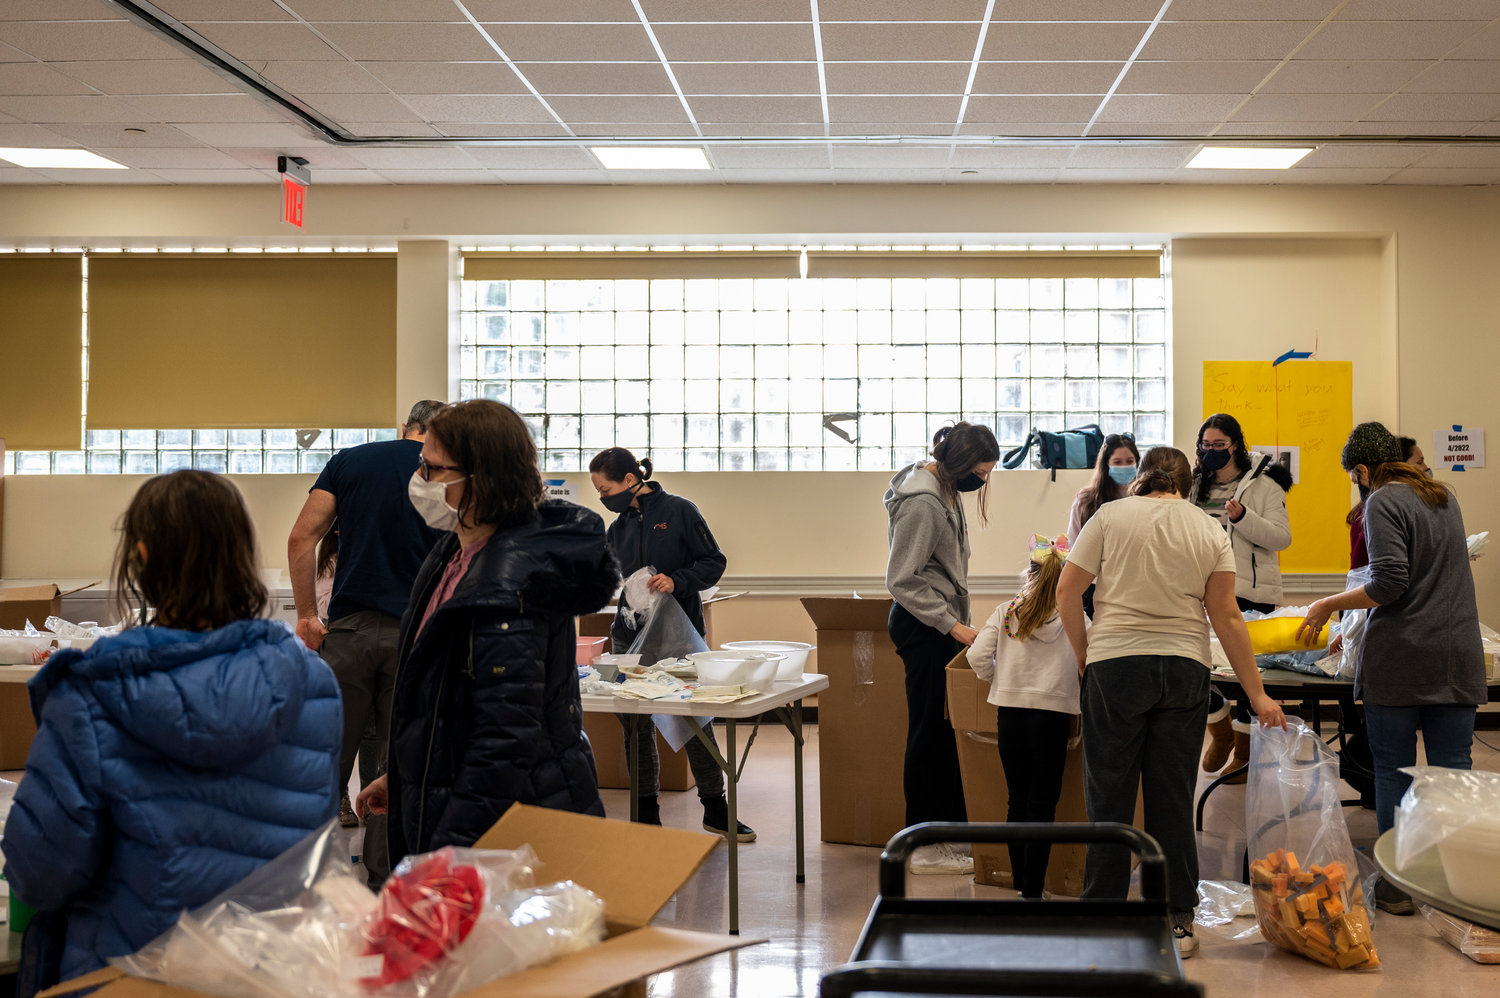 Dozens of volunteers sorted some 2,000 pounds of medical supplies at The Riverdale Y on Dr. Martin Luther King Jr. Day. They partnered with Afya Foundation, an organization that rescues surplus medical supplies and donates them to under-resourced communities. During the coronavirus pandemic, Afya has shifted its focus to donating personal protective equipment to Bronx community organizations in need.